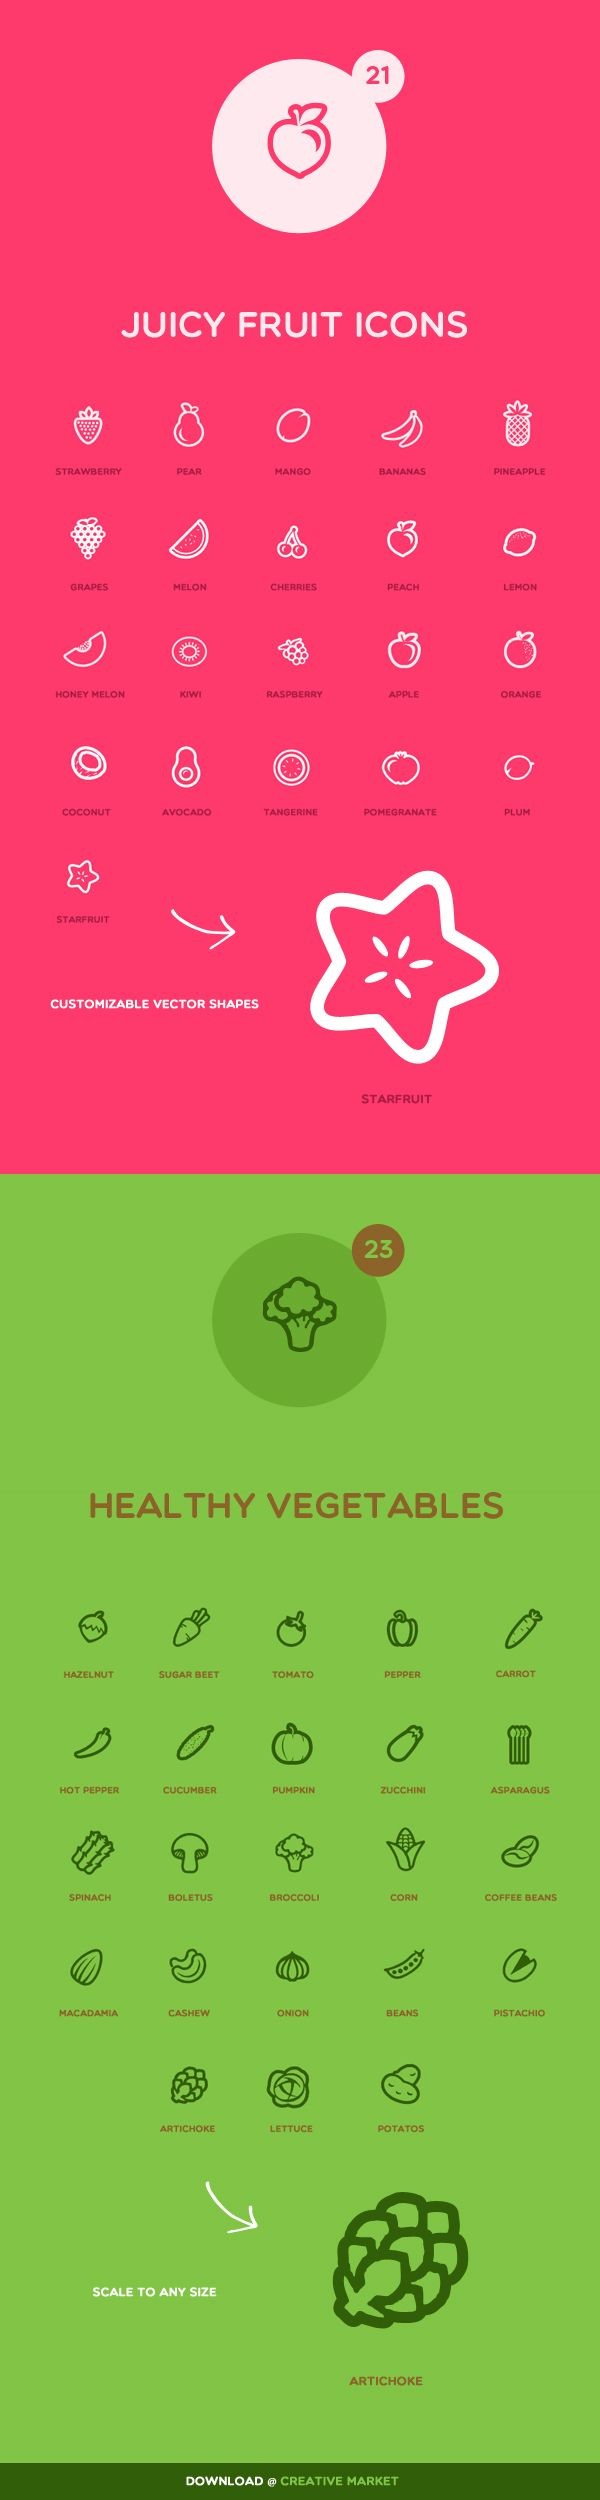 Juicy Fruit and Vegetable Icons by Patrick, via Be...